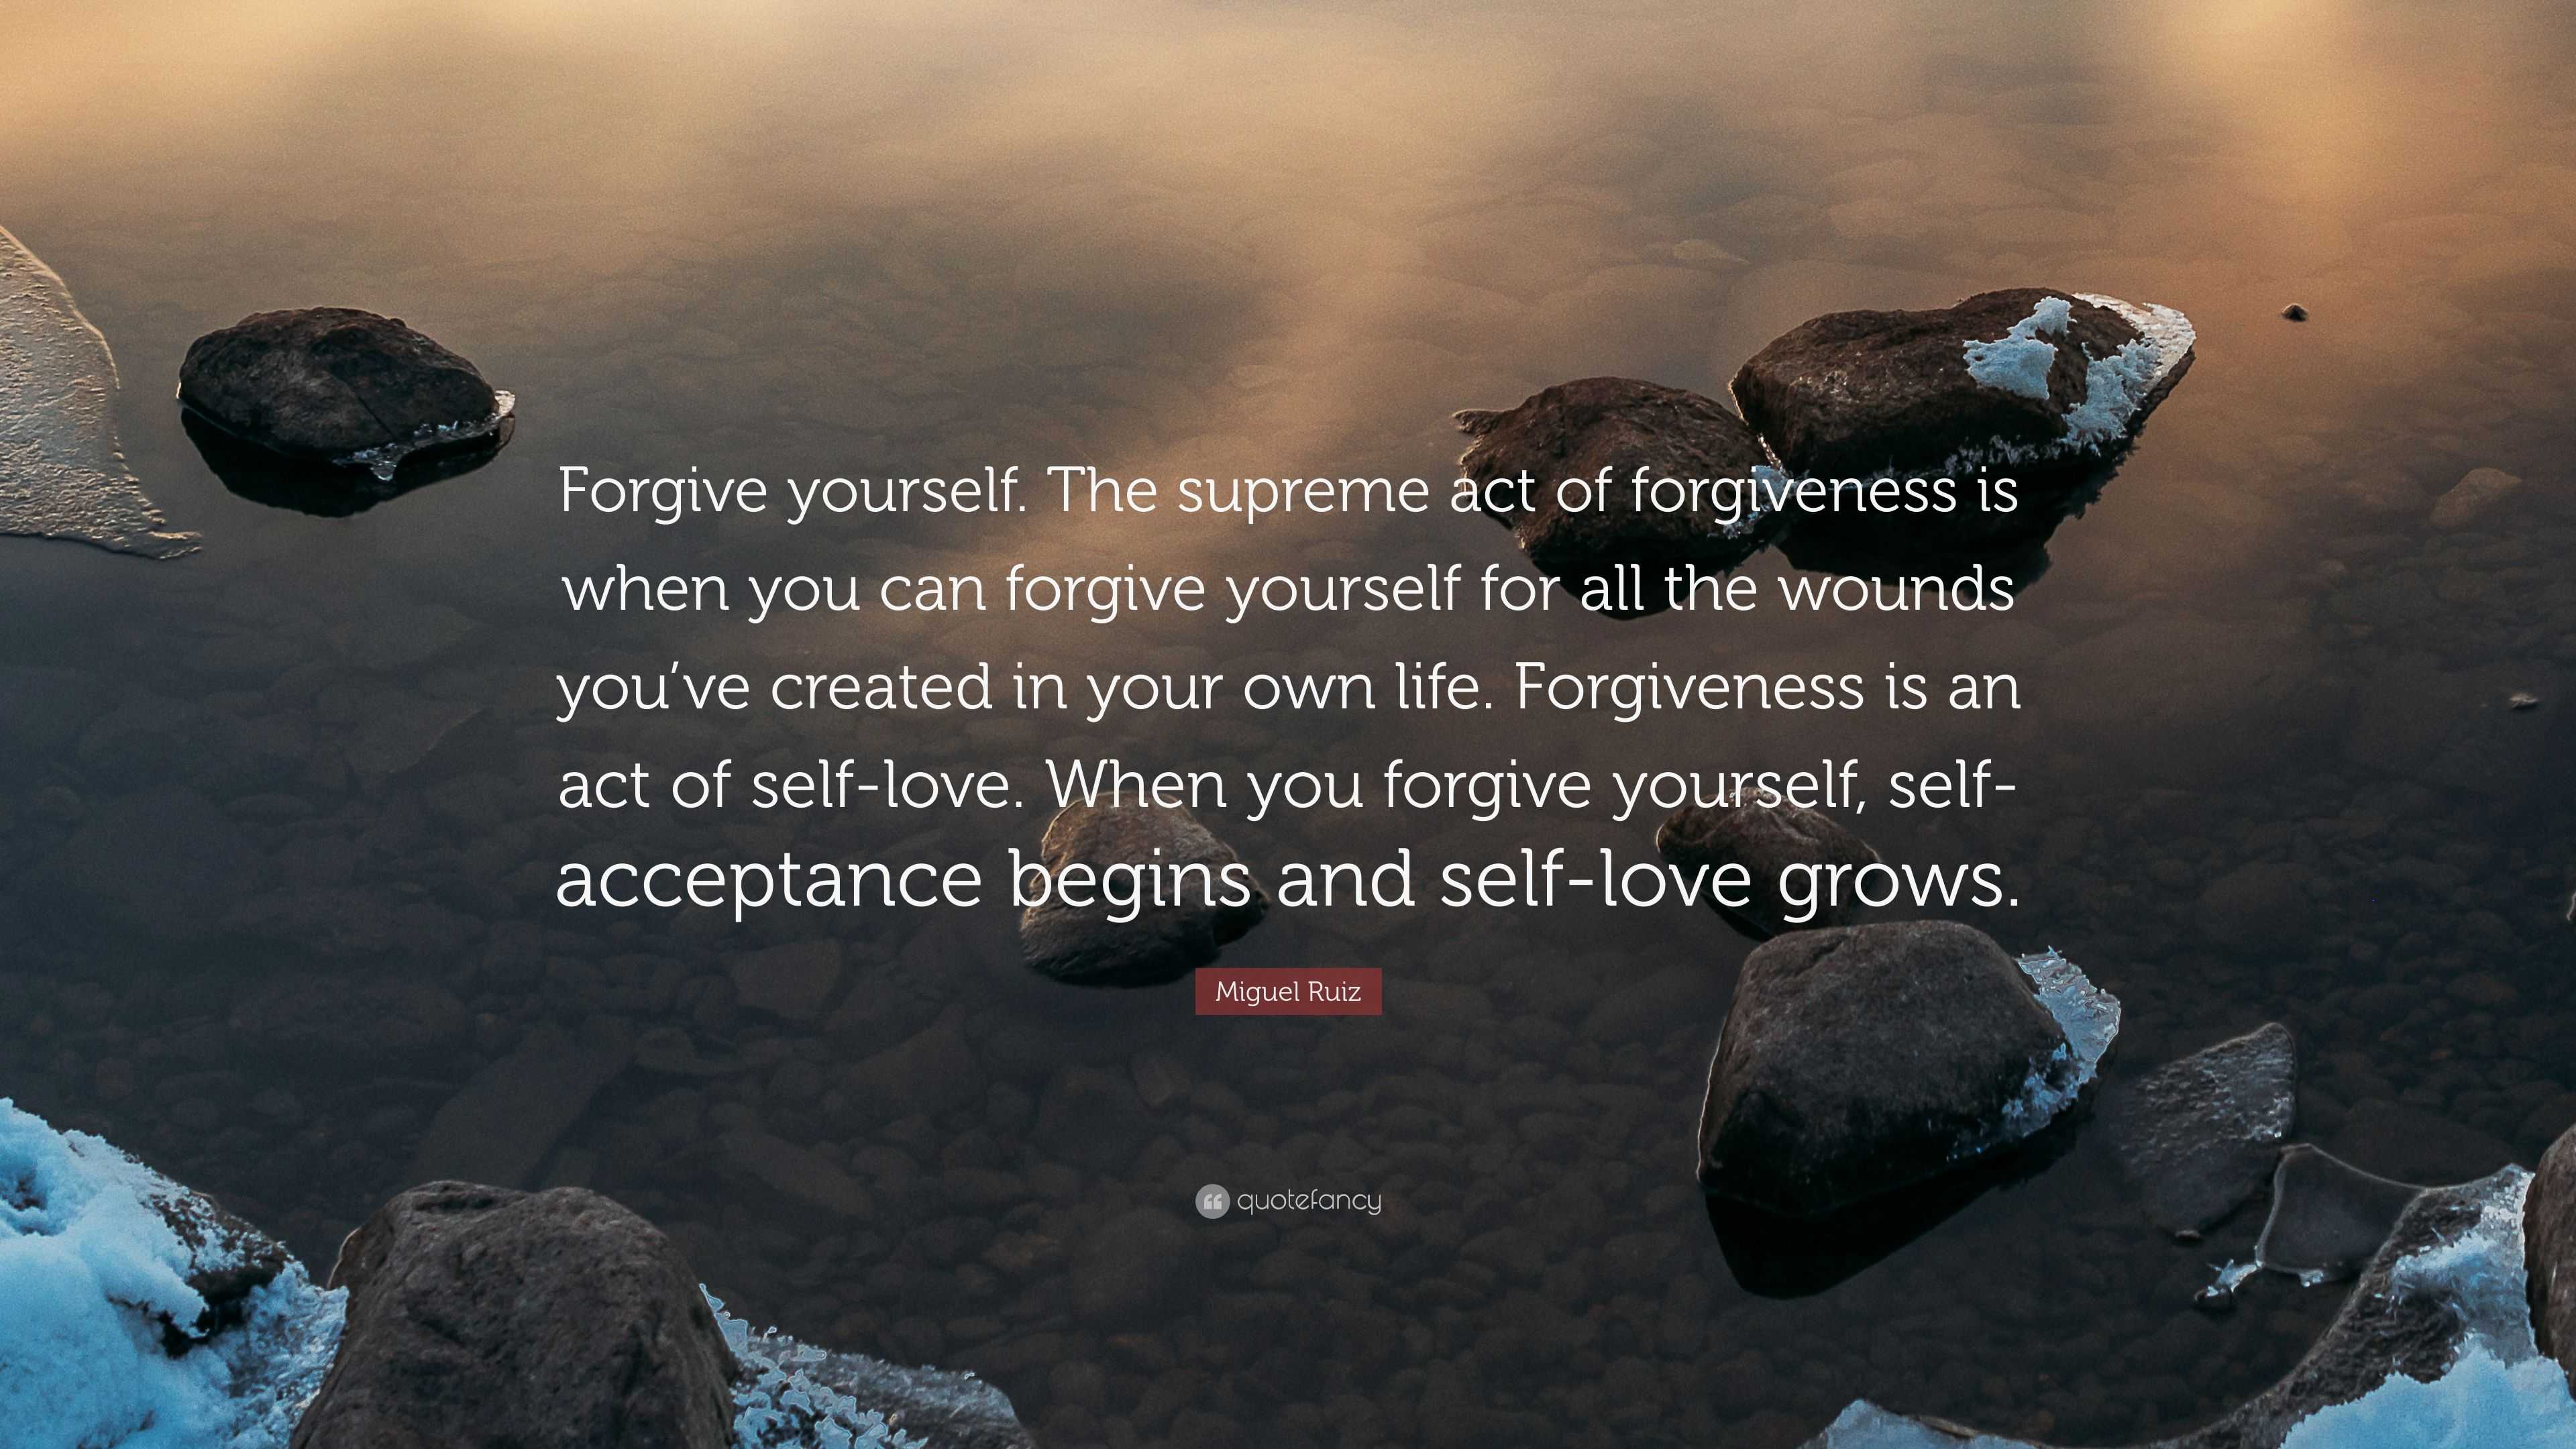 Miguel Ruiz Quote: “Forgive yourself. The supreme act of forgiveness is